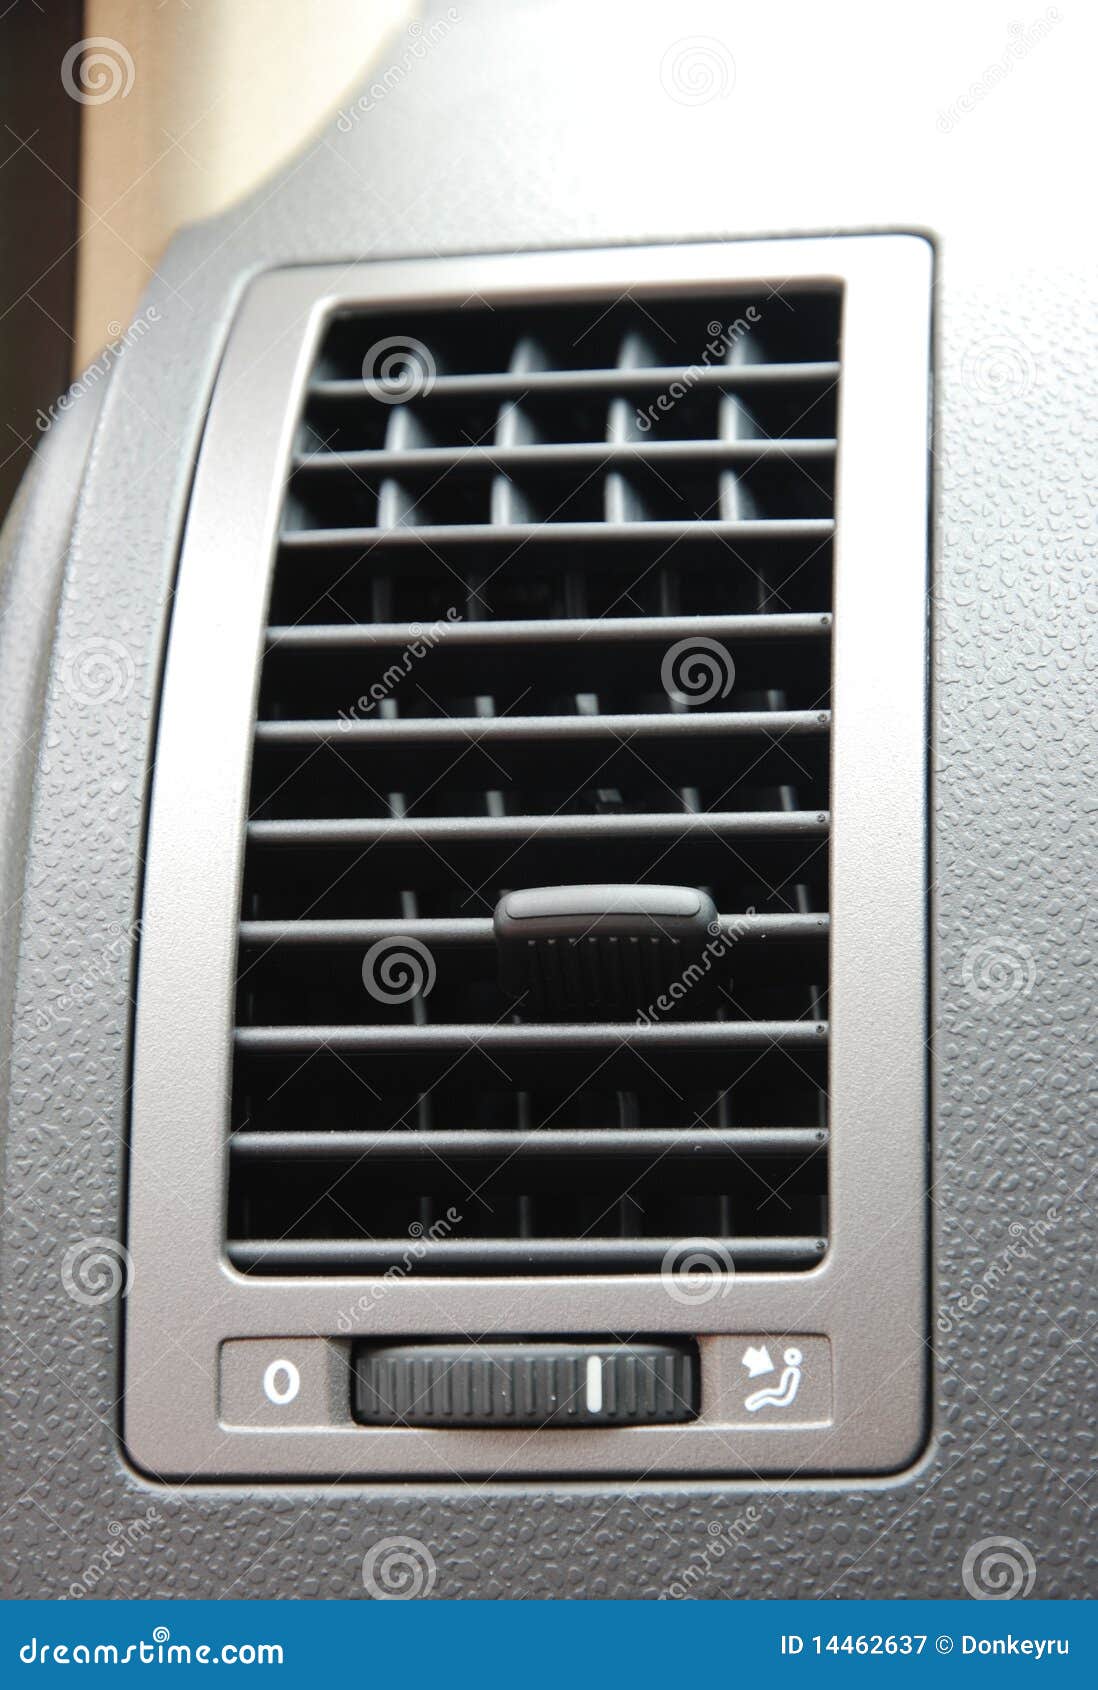 Car Air Conditioner Royalty Free Stock Photography - Image: 14462637